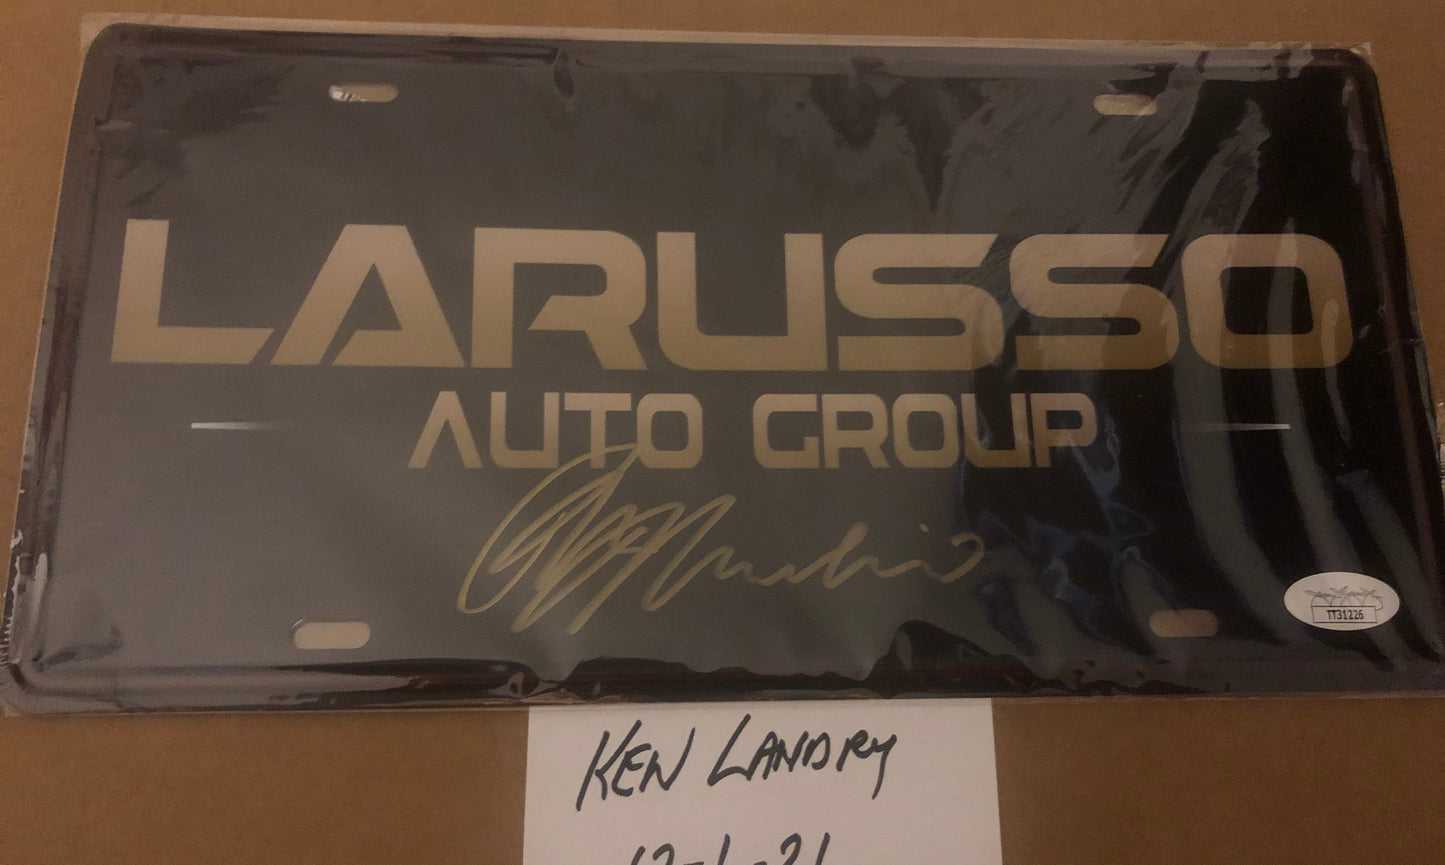 Cobra Kai  Ralph Macchio signed LARUSSO Auto Group license plate with JSA Witness